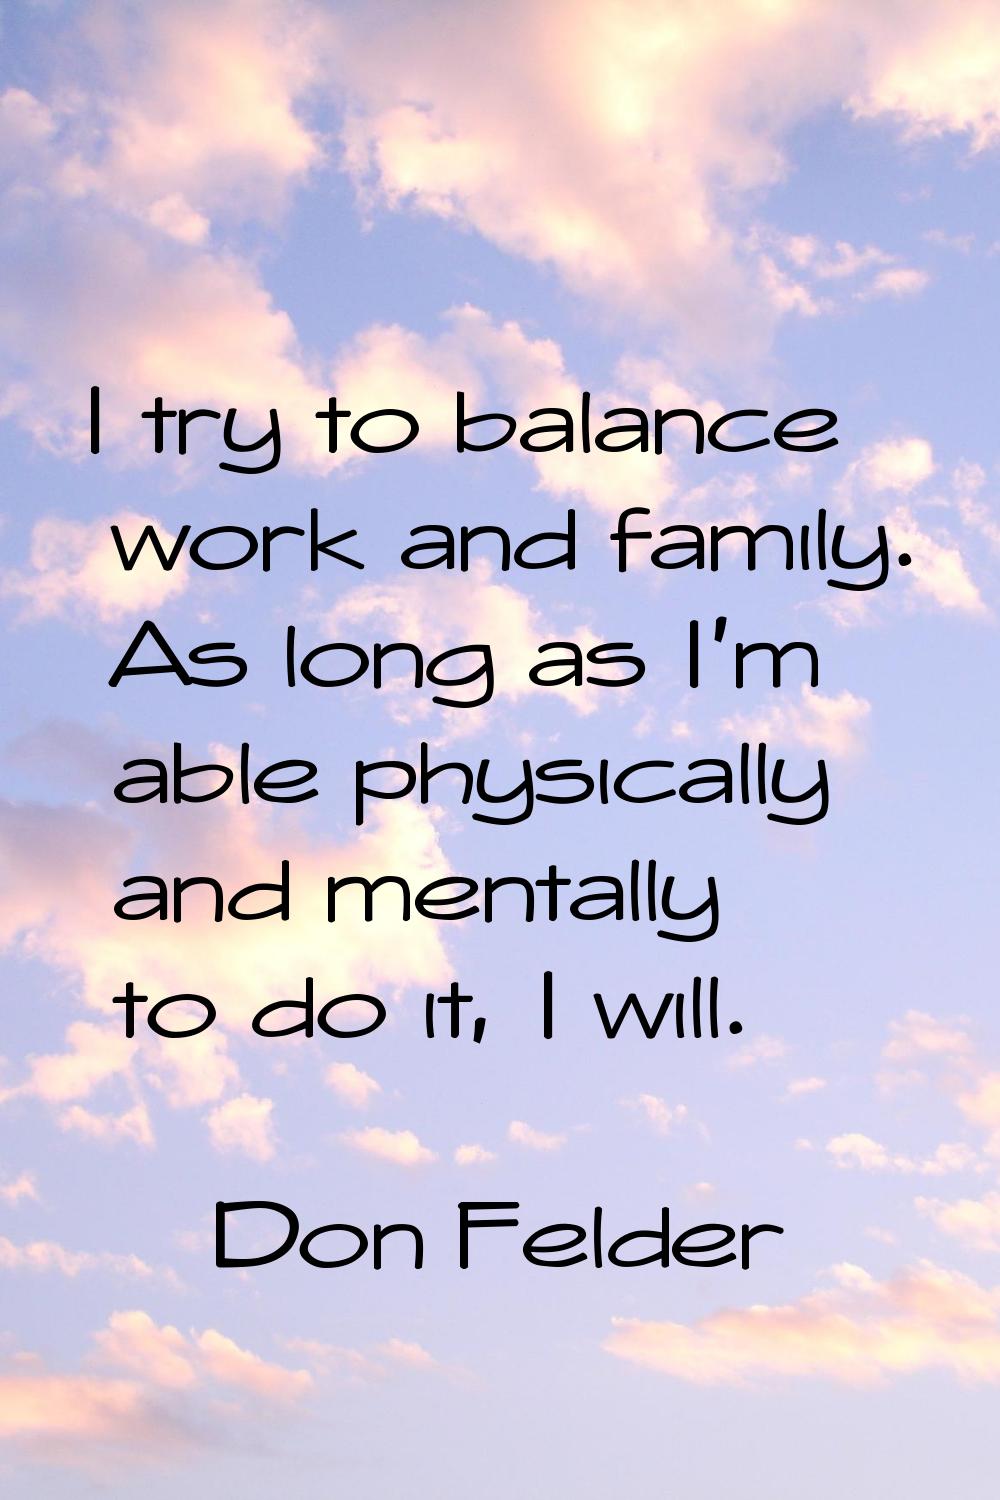 I try to balance work and family. As long as I'm able physically and mentally to do it, I will.